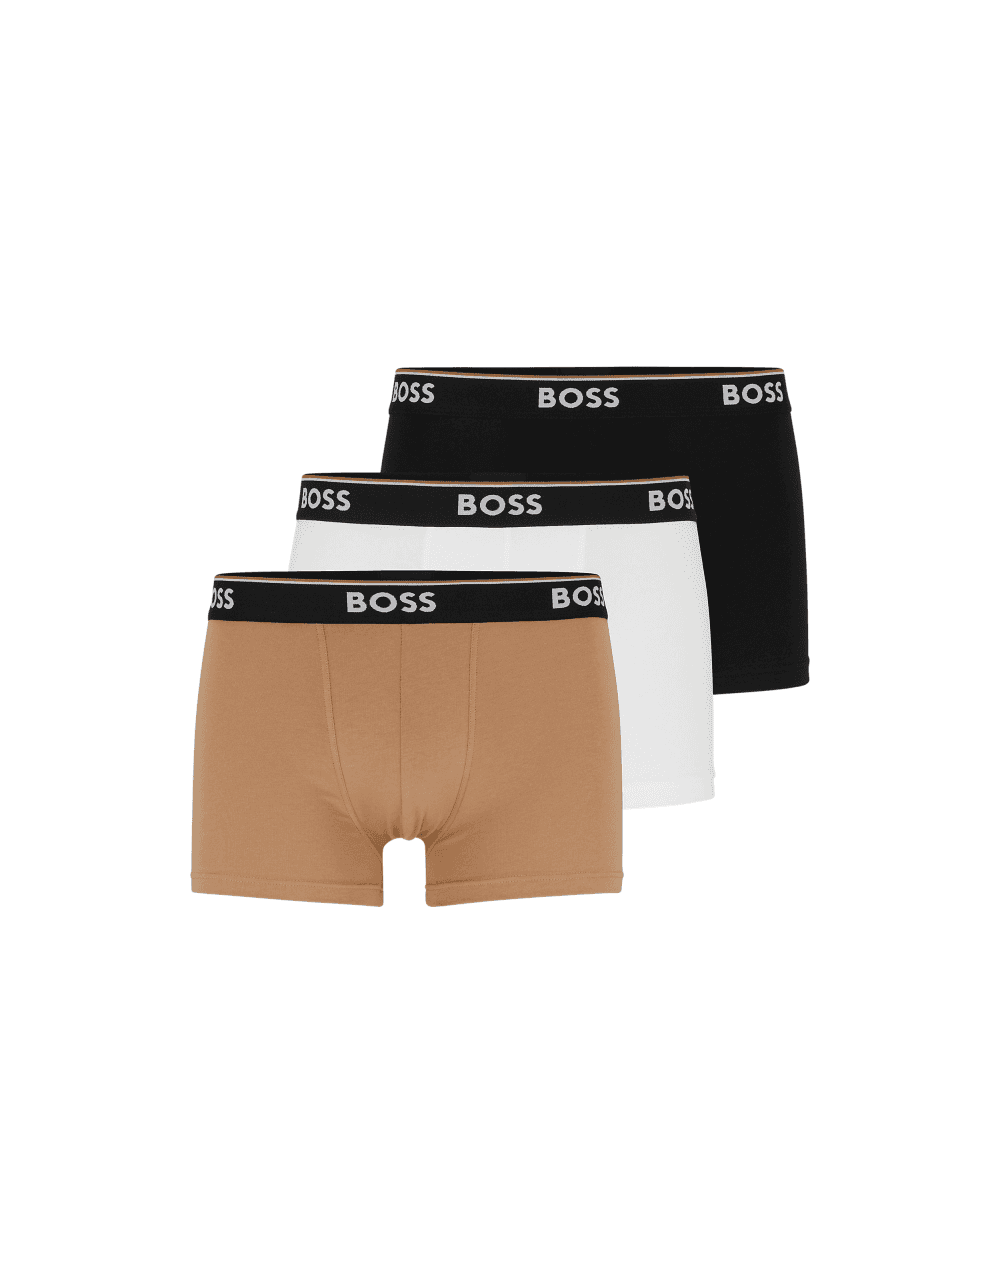 Boss Pack of 3 Beige Black and White Boxers Trunks